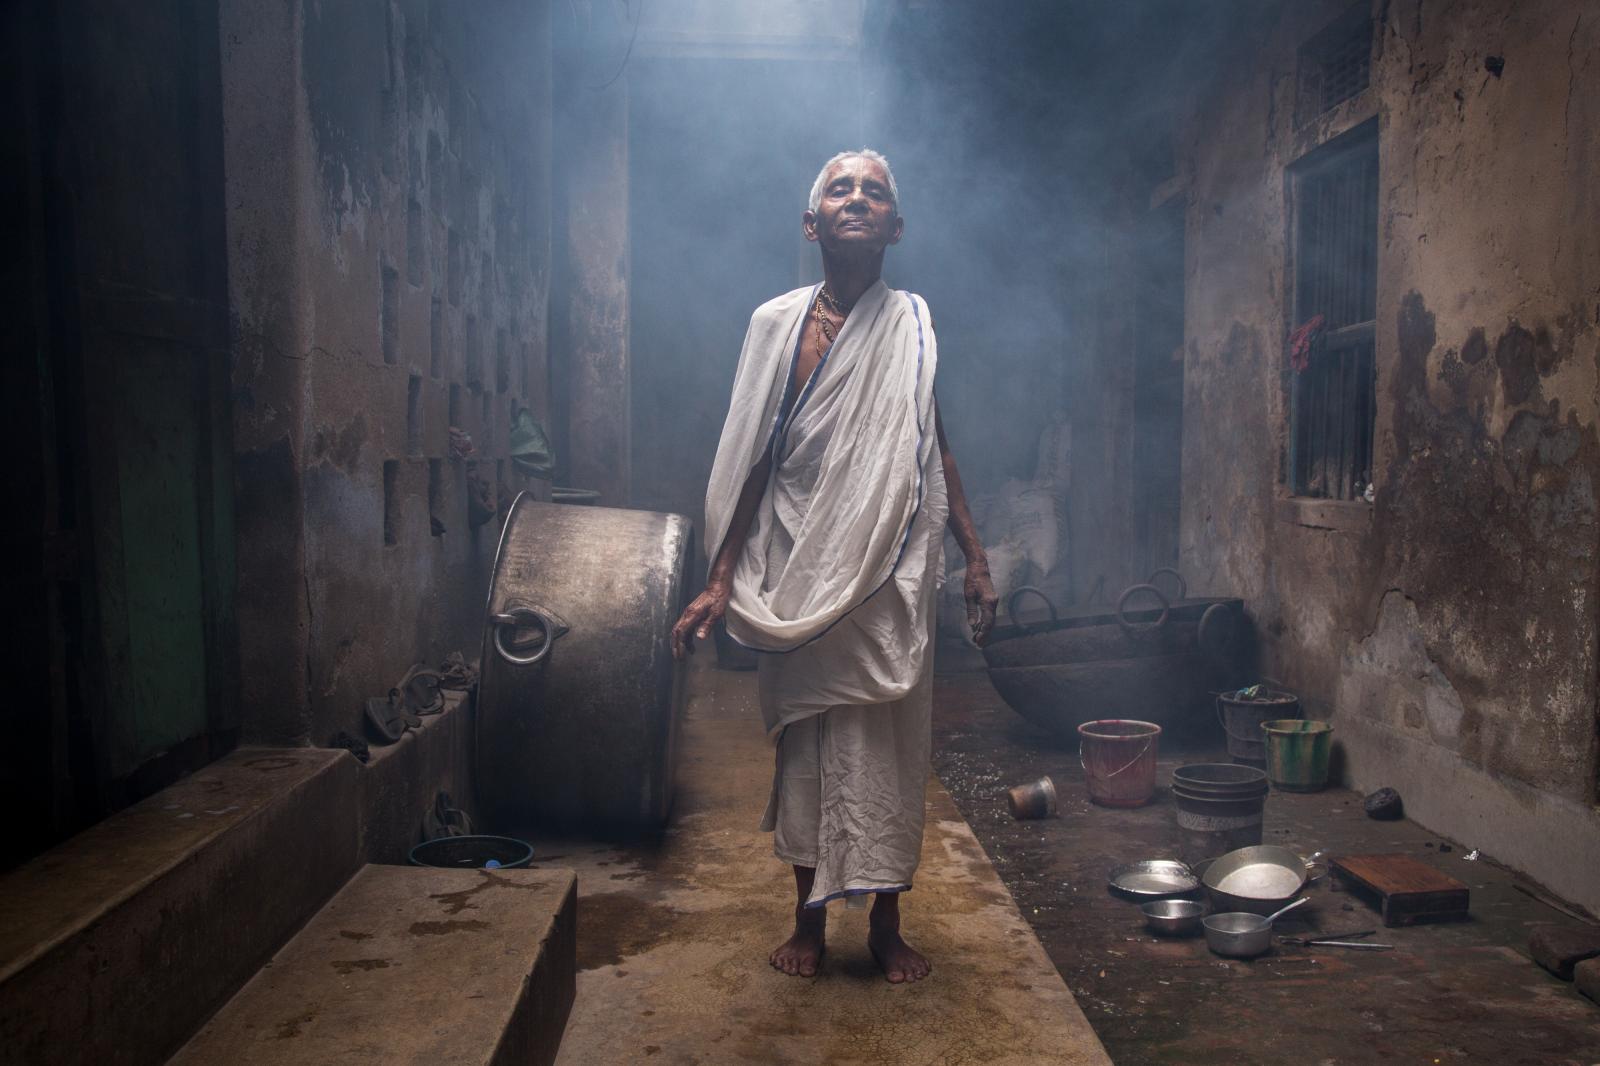 Bhakti Dashi, 75 years old from...and chant in exchange for food.